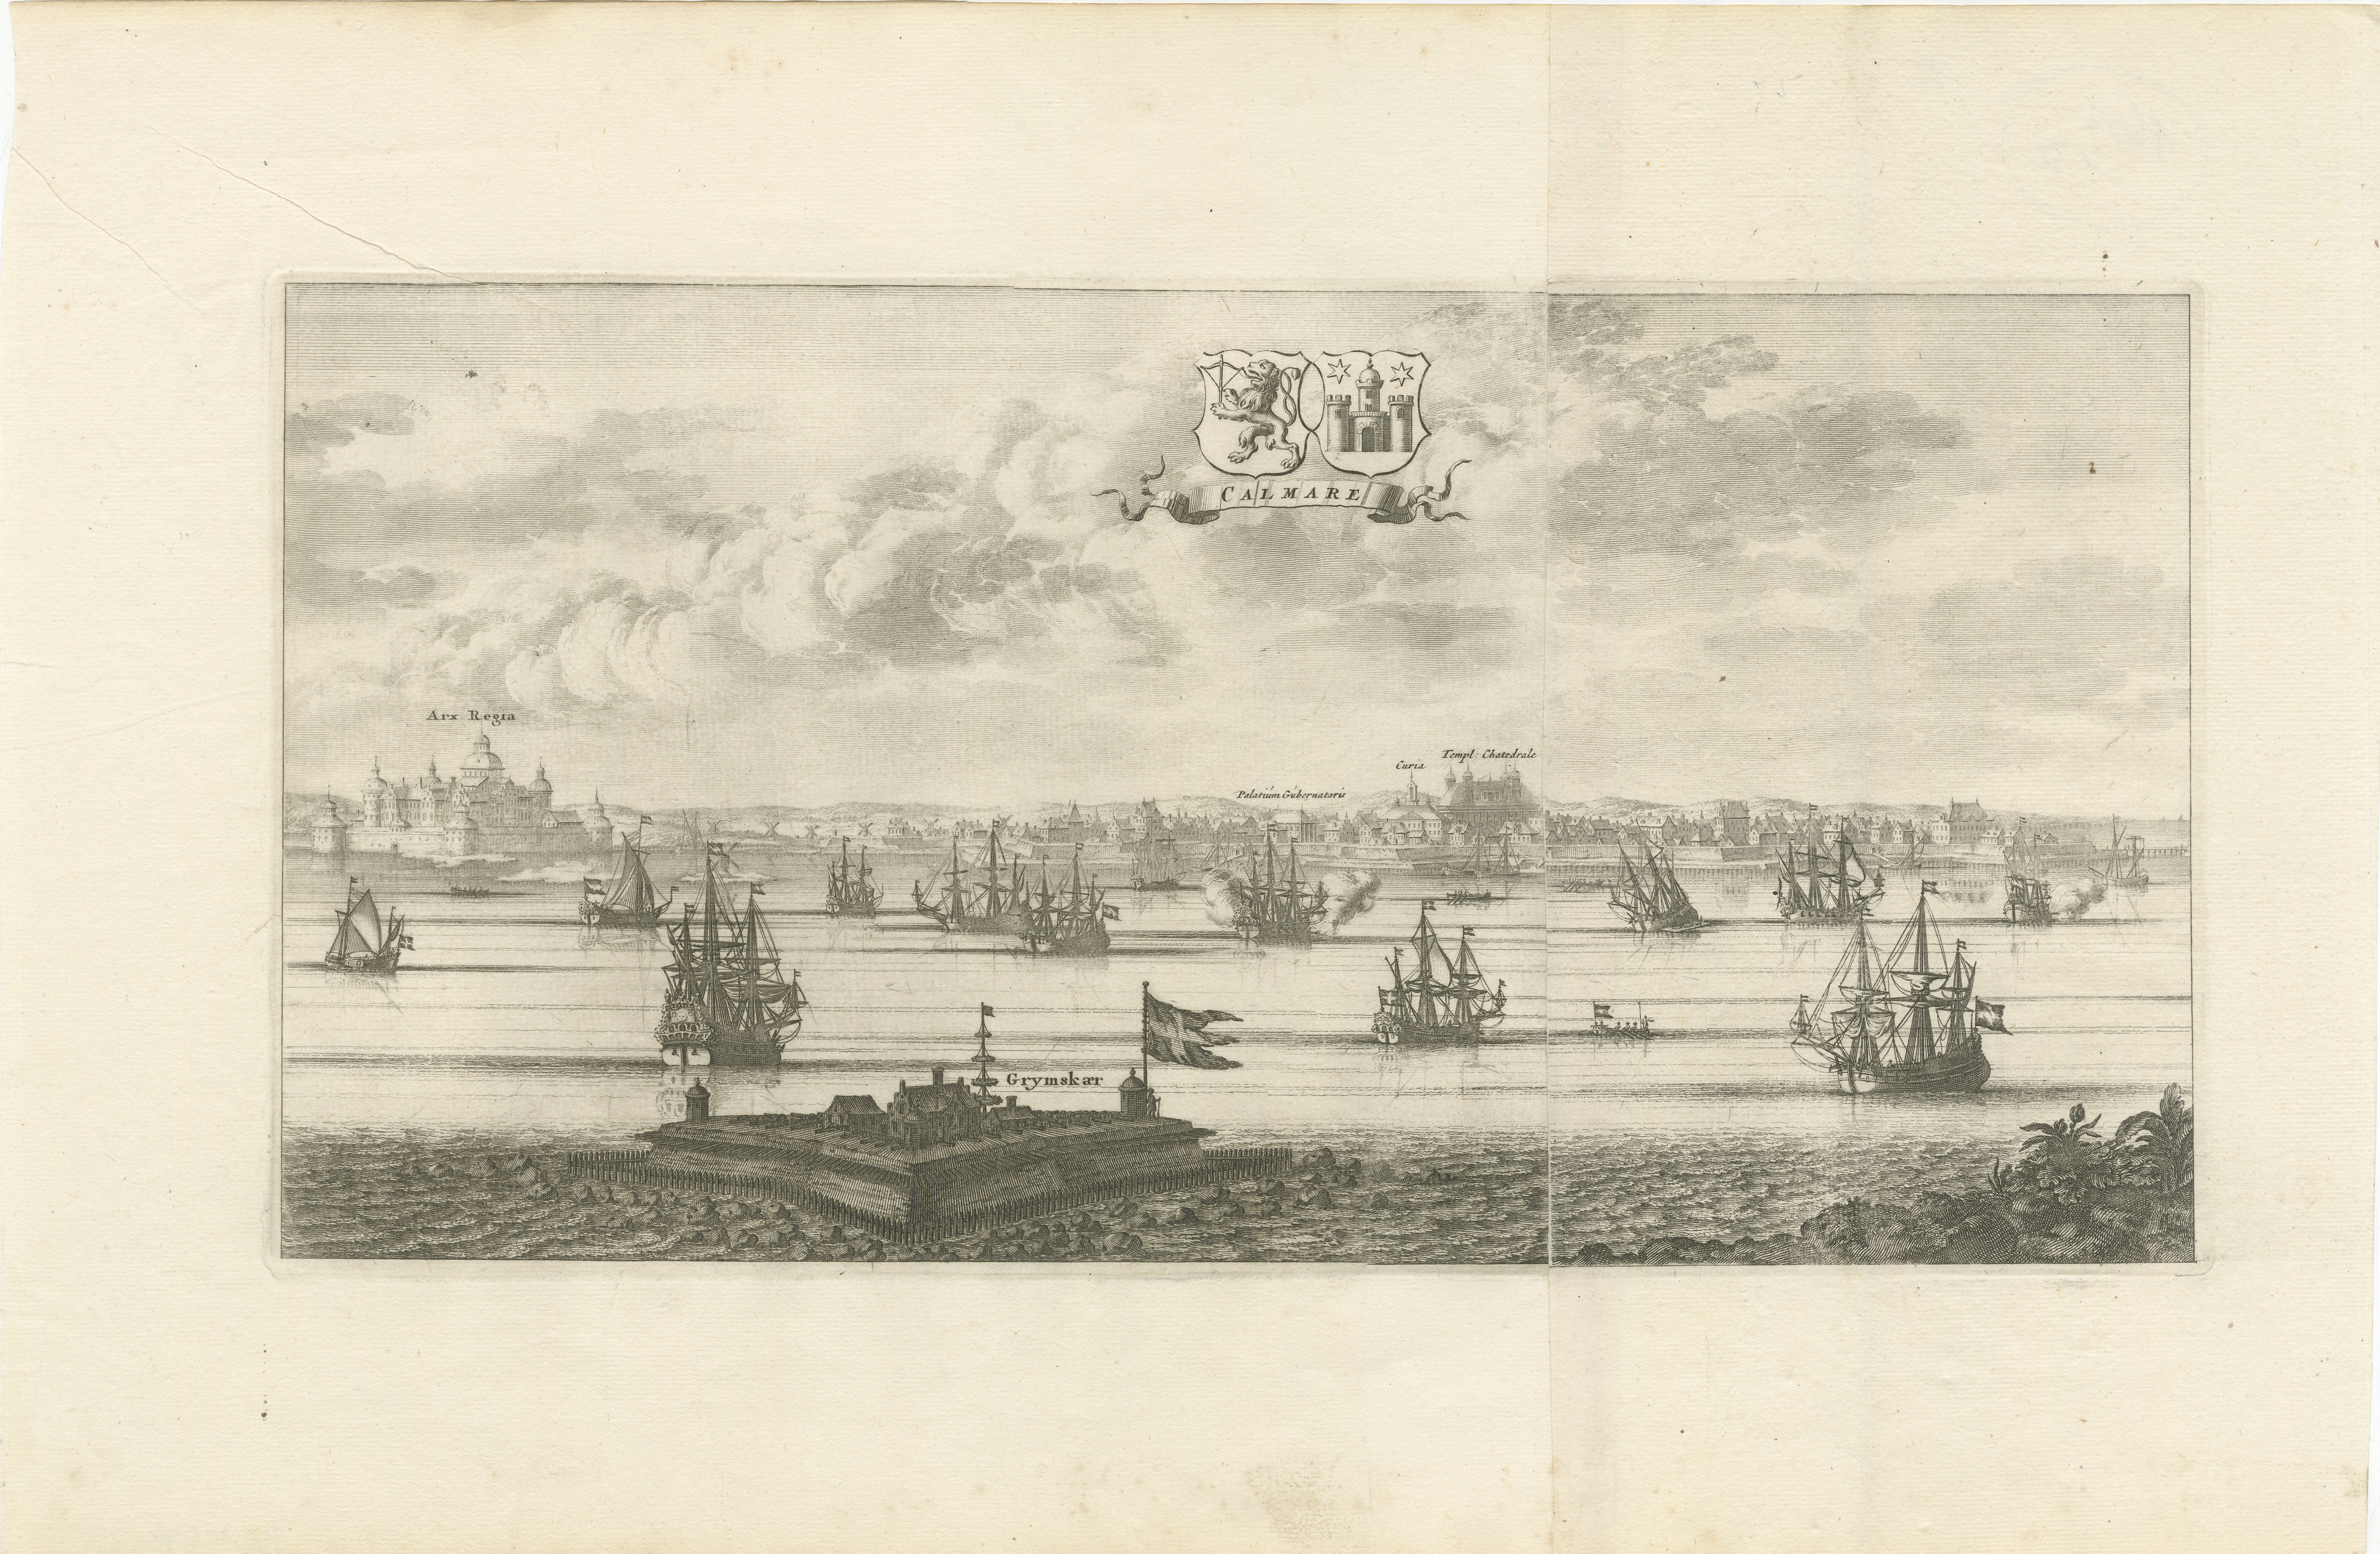 The engraving depicts the city of Kalmar, a historically significant city on the east coast of Sweden. This panoramic view captures the bustling port and the city's skyline during the late 17th to early 18th century. It's part of 